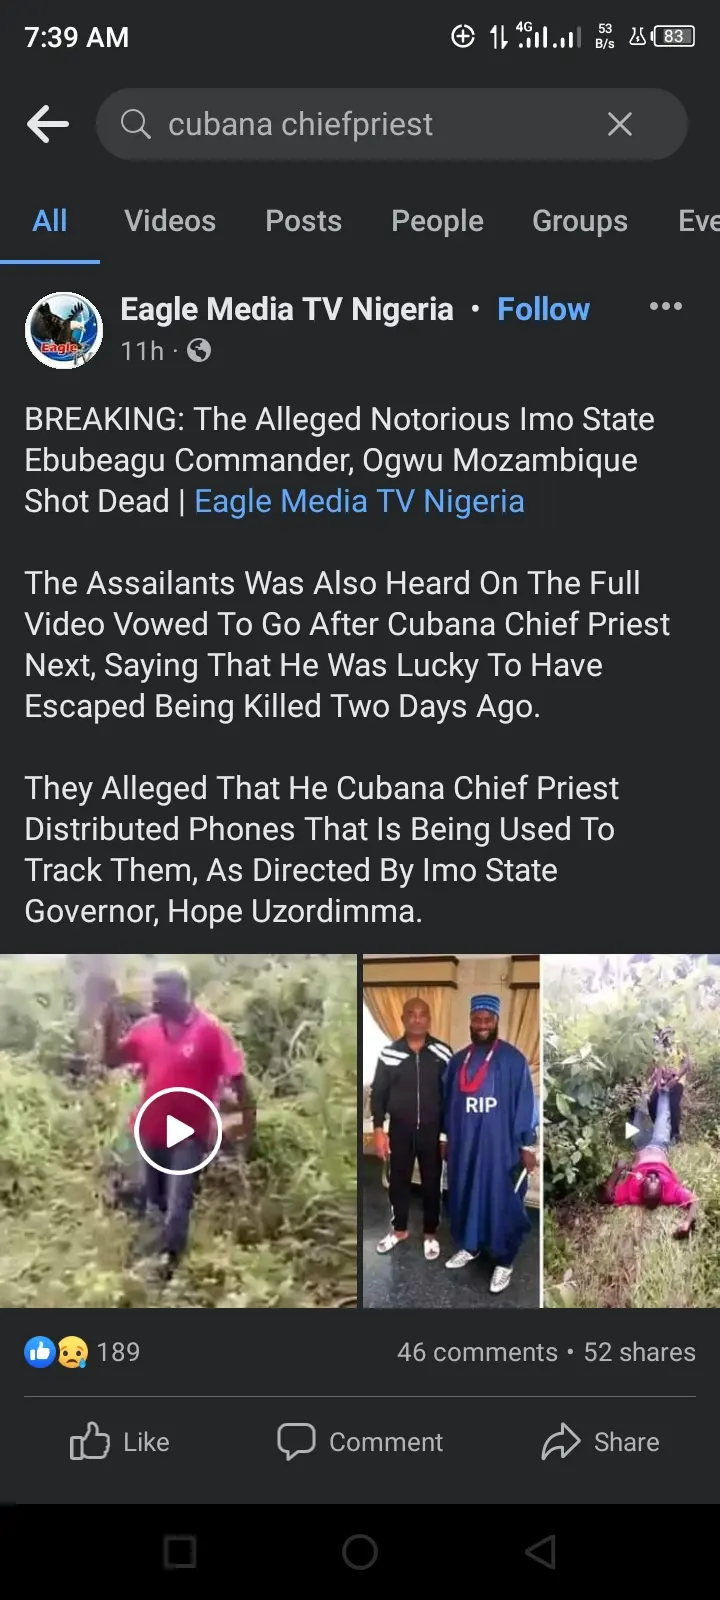 How Security Operatives Battle Gallantly To Make Cubana Chiefpriest, Wife Escape Death On Friday Night In Oba ~ OsazuwaAkonedo ##Anambra ##Unknown #Biafra #ChiefPriest #Cubana #Gunmen #oba #Biafra #Cubana #football #Gunmen #Navy #Nnewi #Onitsha #Onitsha-Owerri #Pascal #security #Unknown